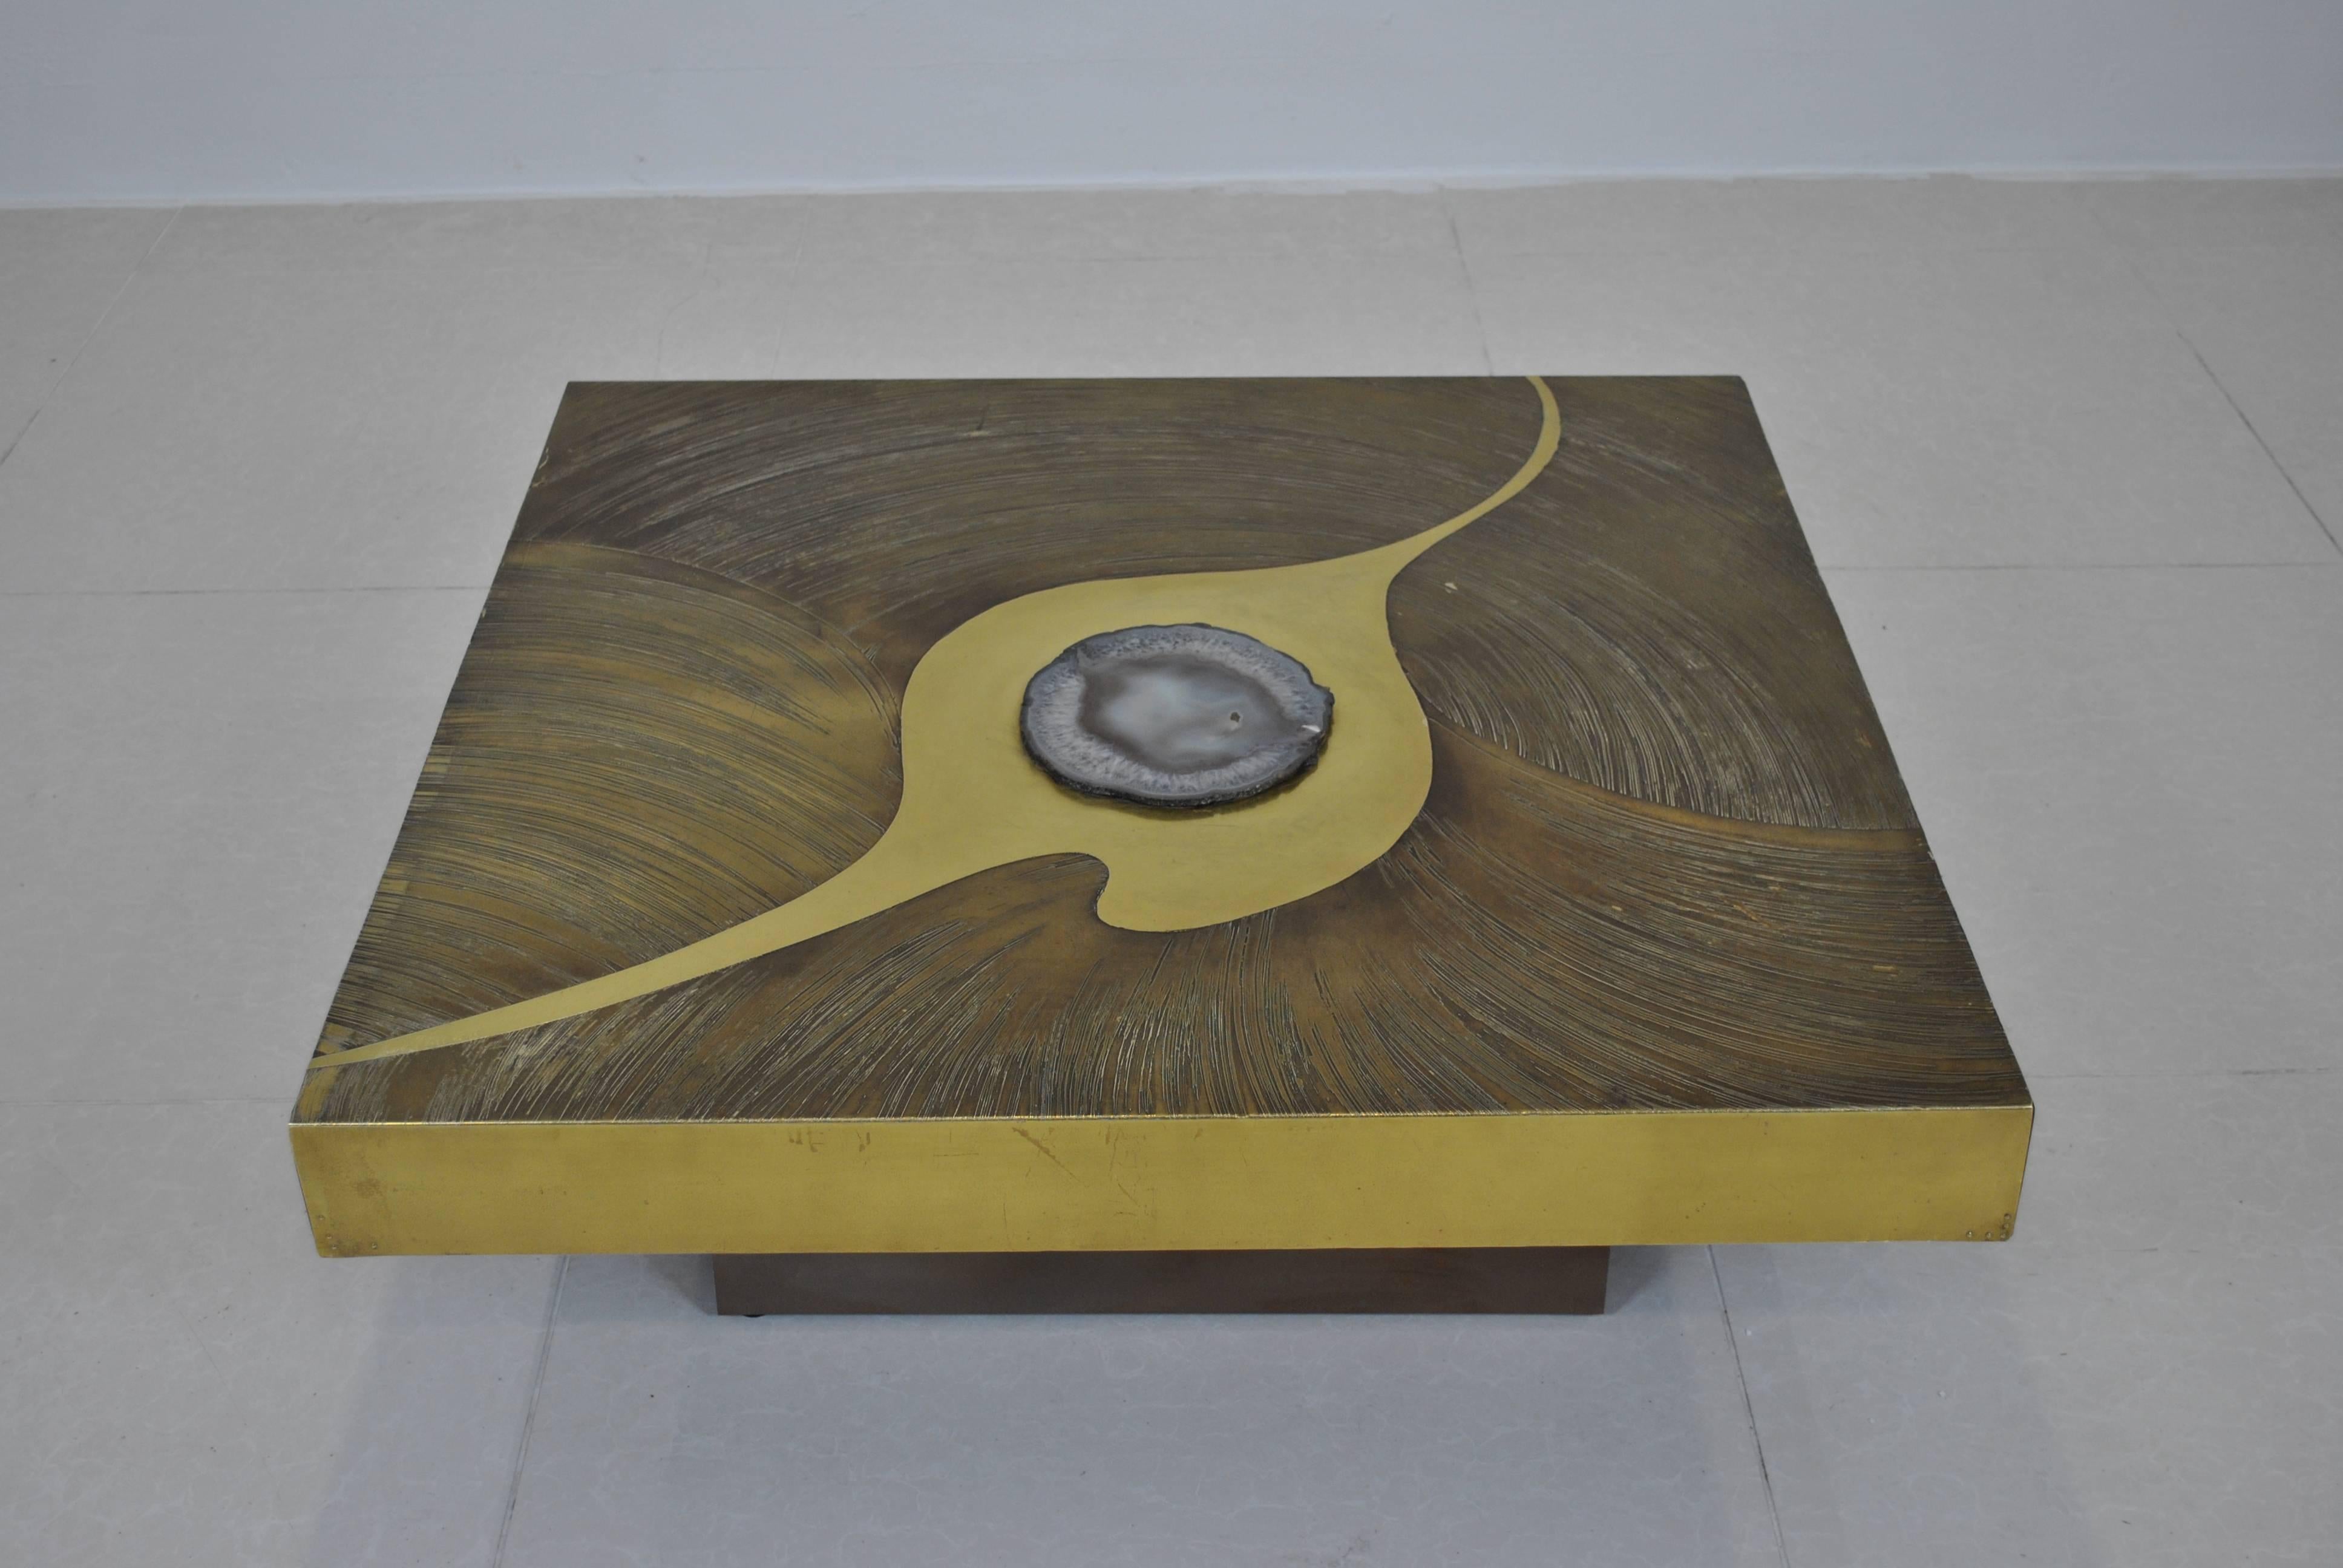 Hollywood Regency Etched Brass and Agate Coffee Table by Marc D'Haenens For Sale